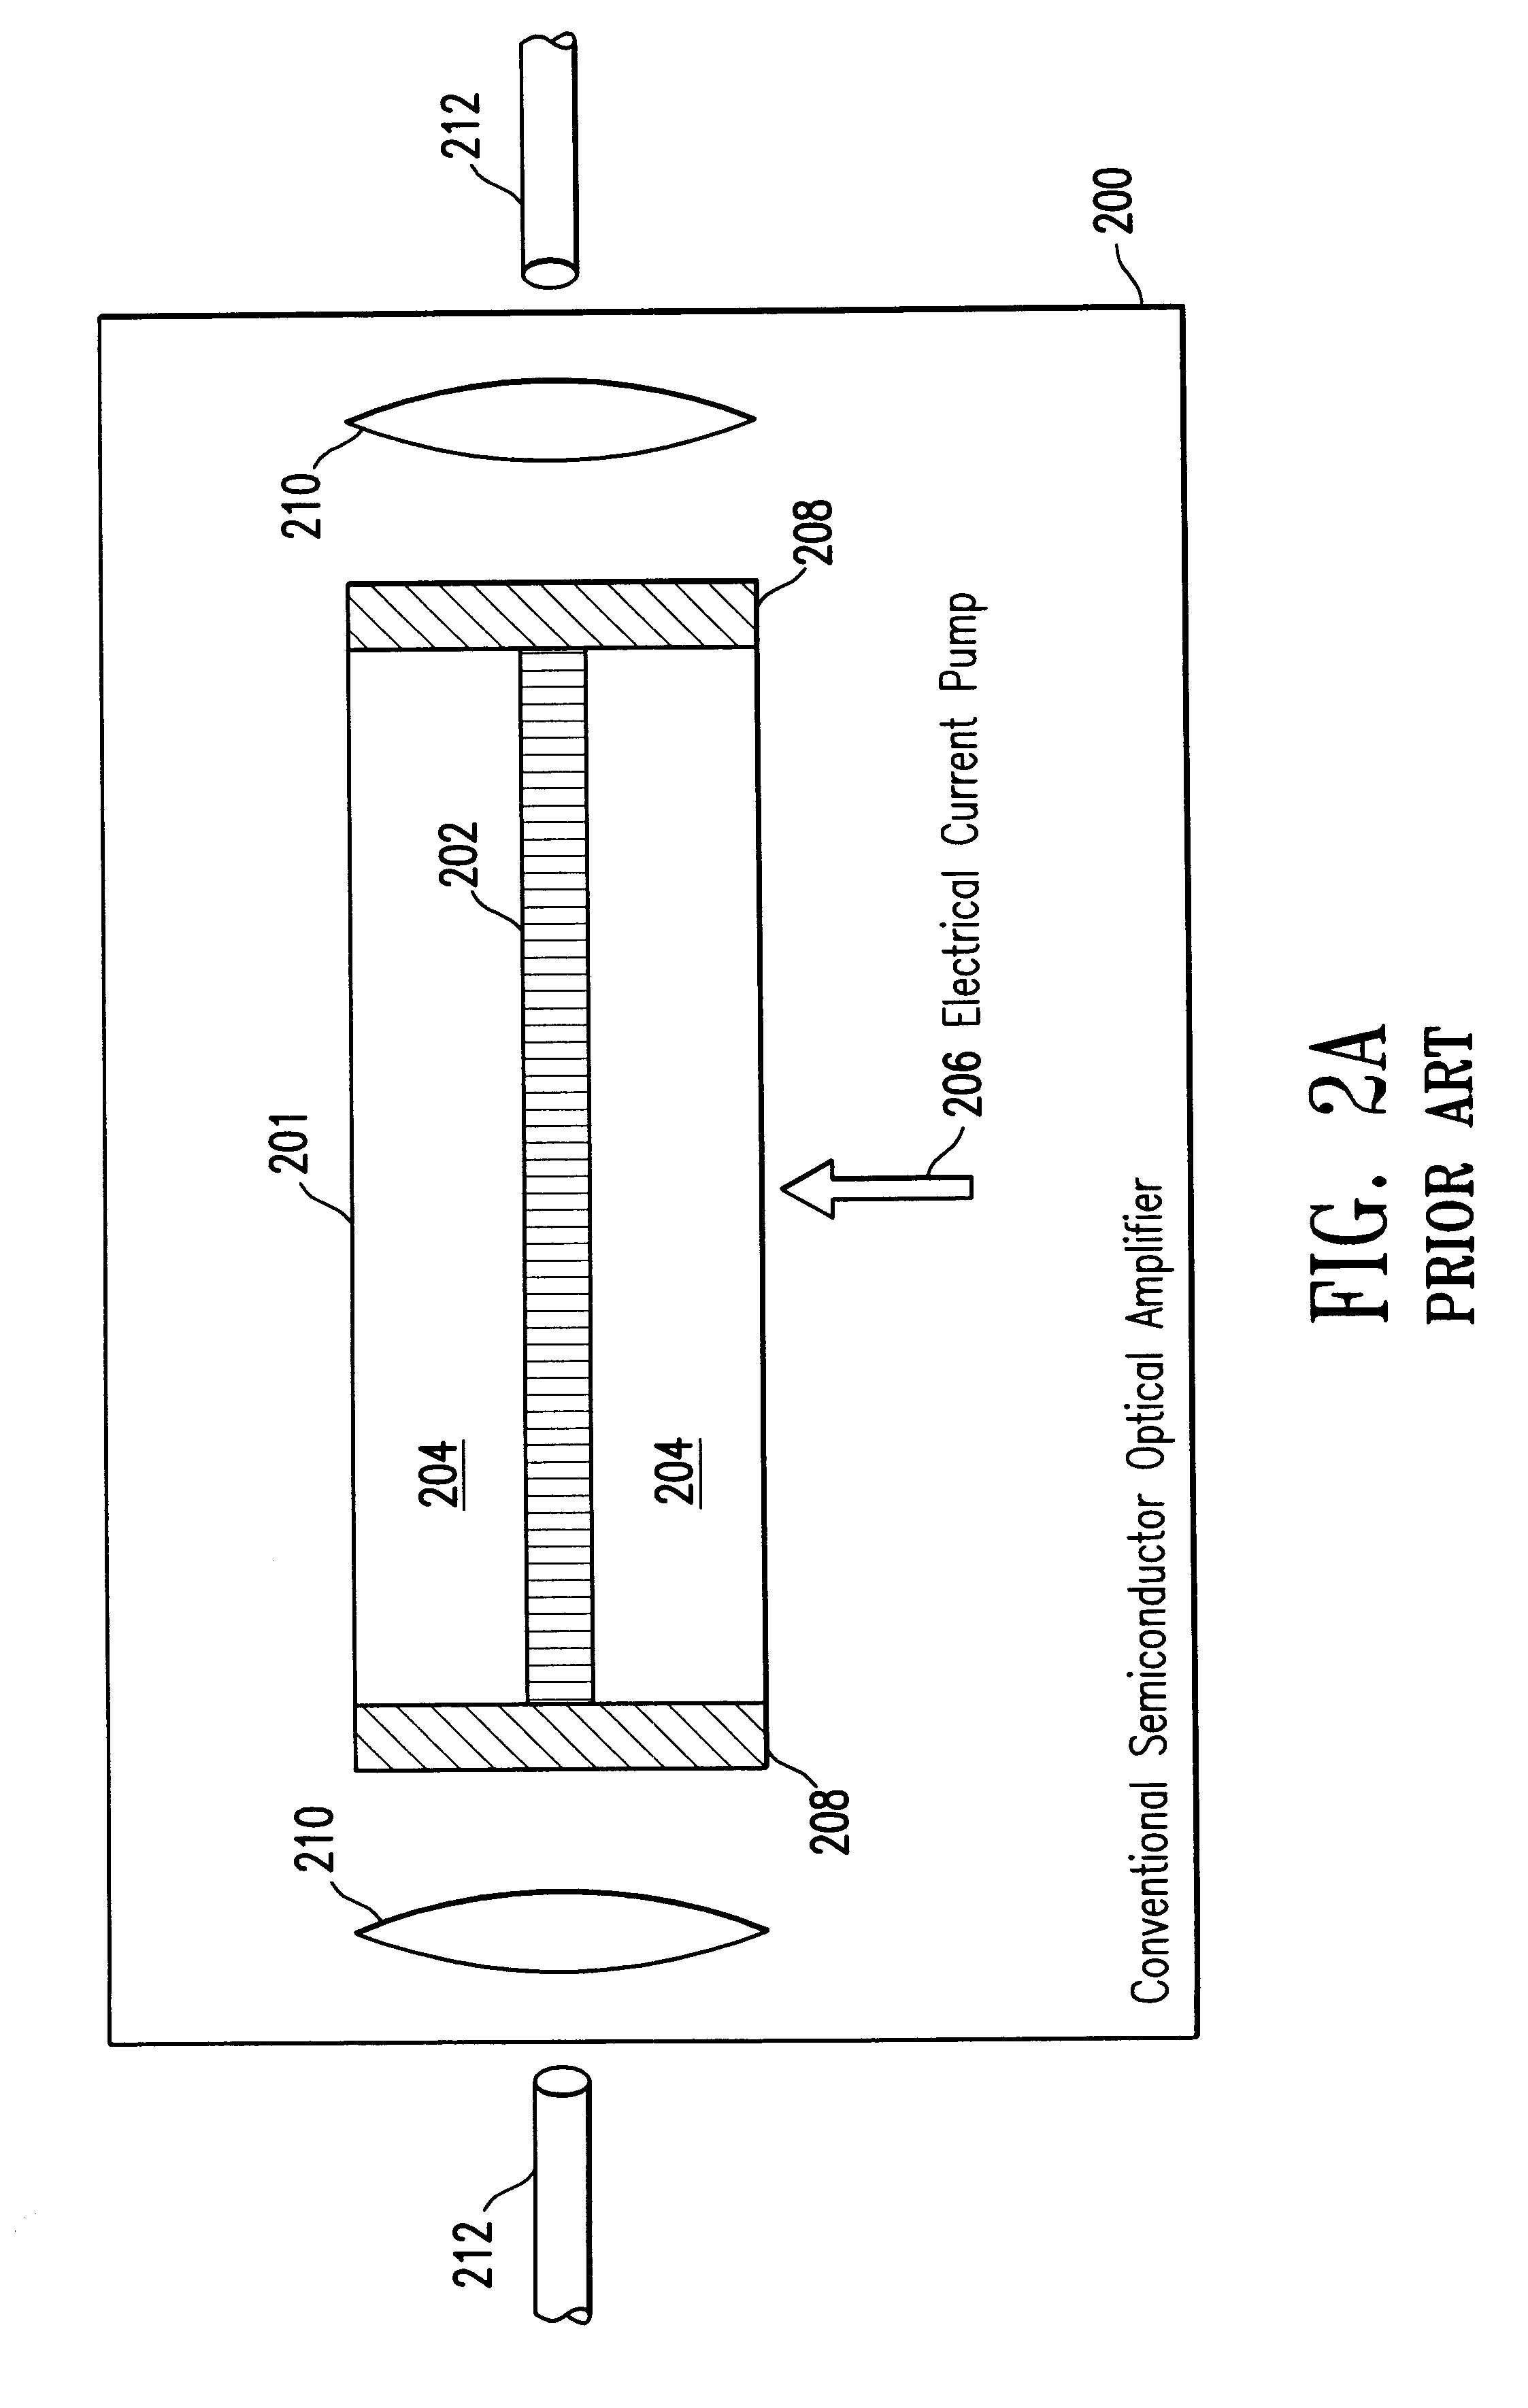 Tunable-gain lasing semiconductor optical amplifier